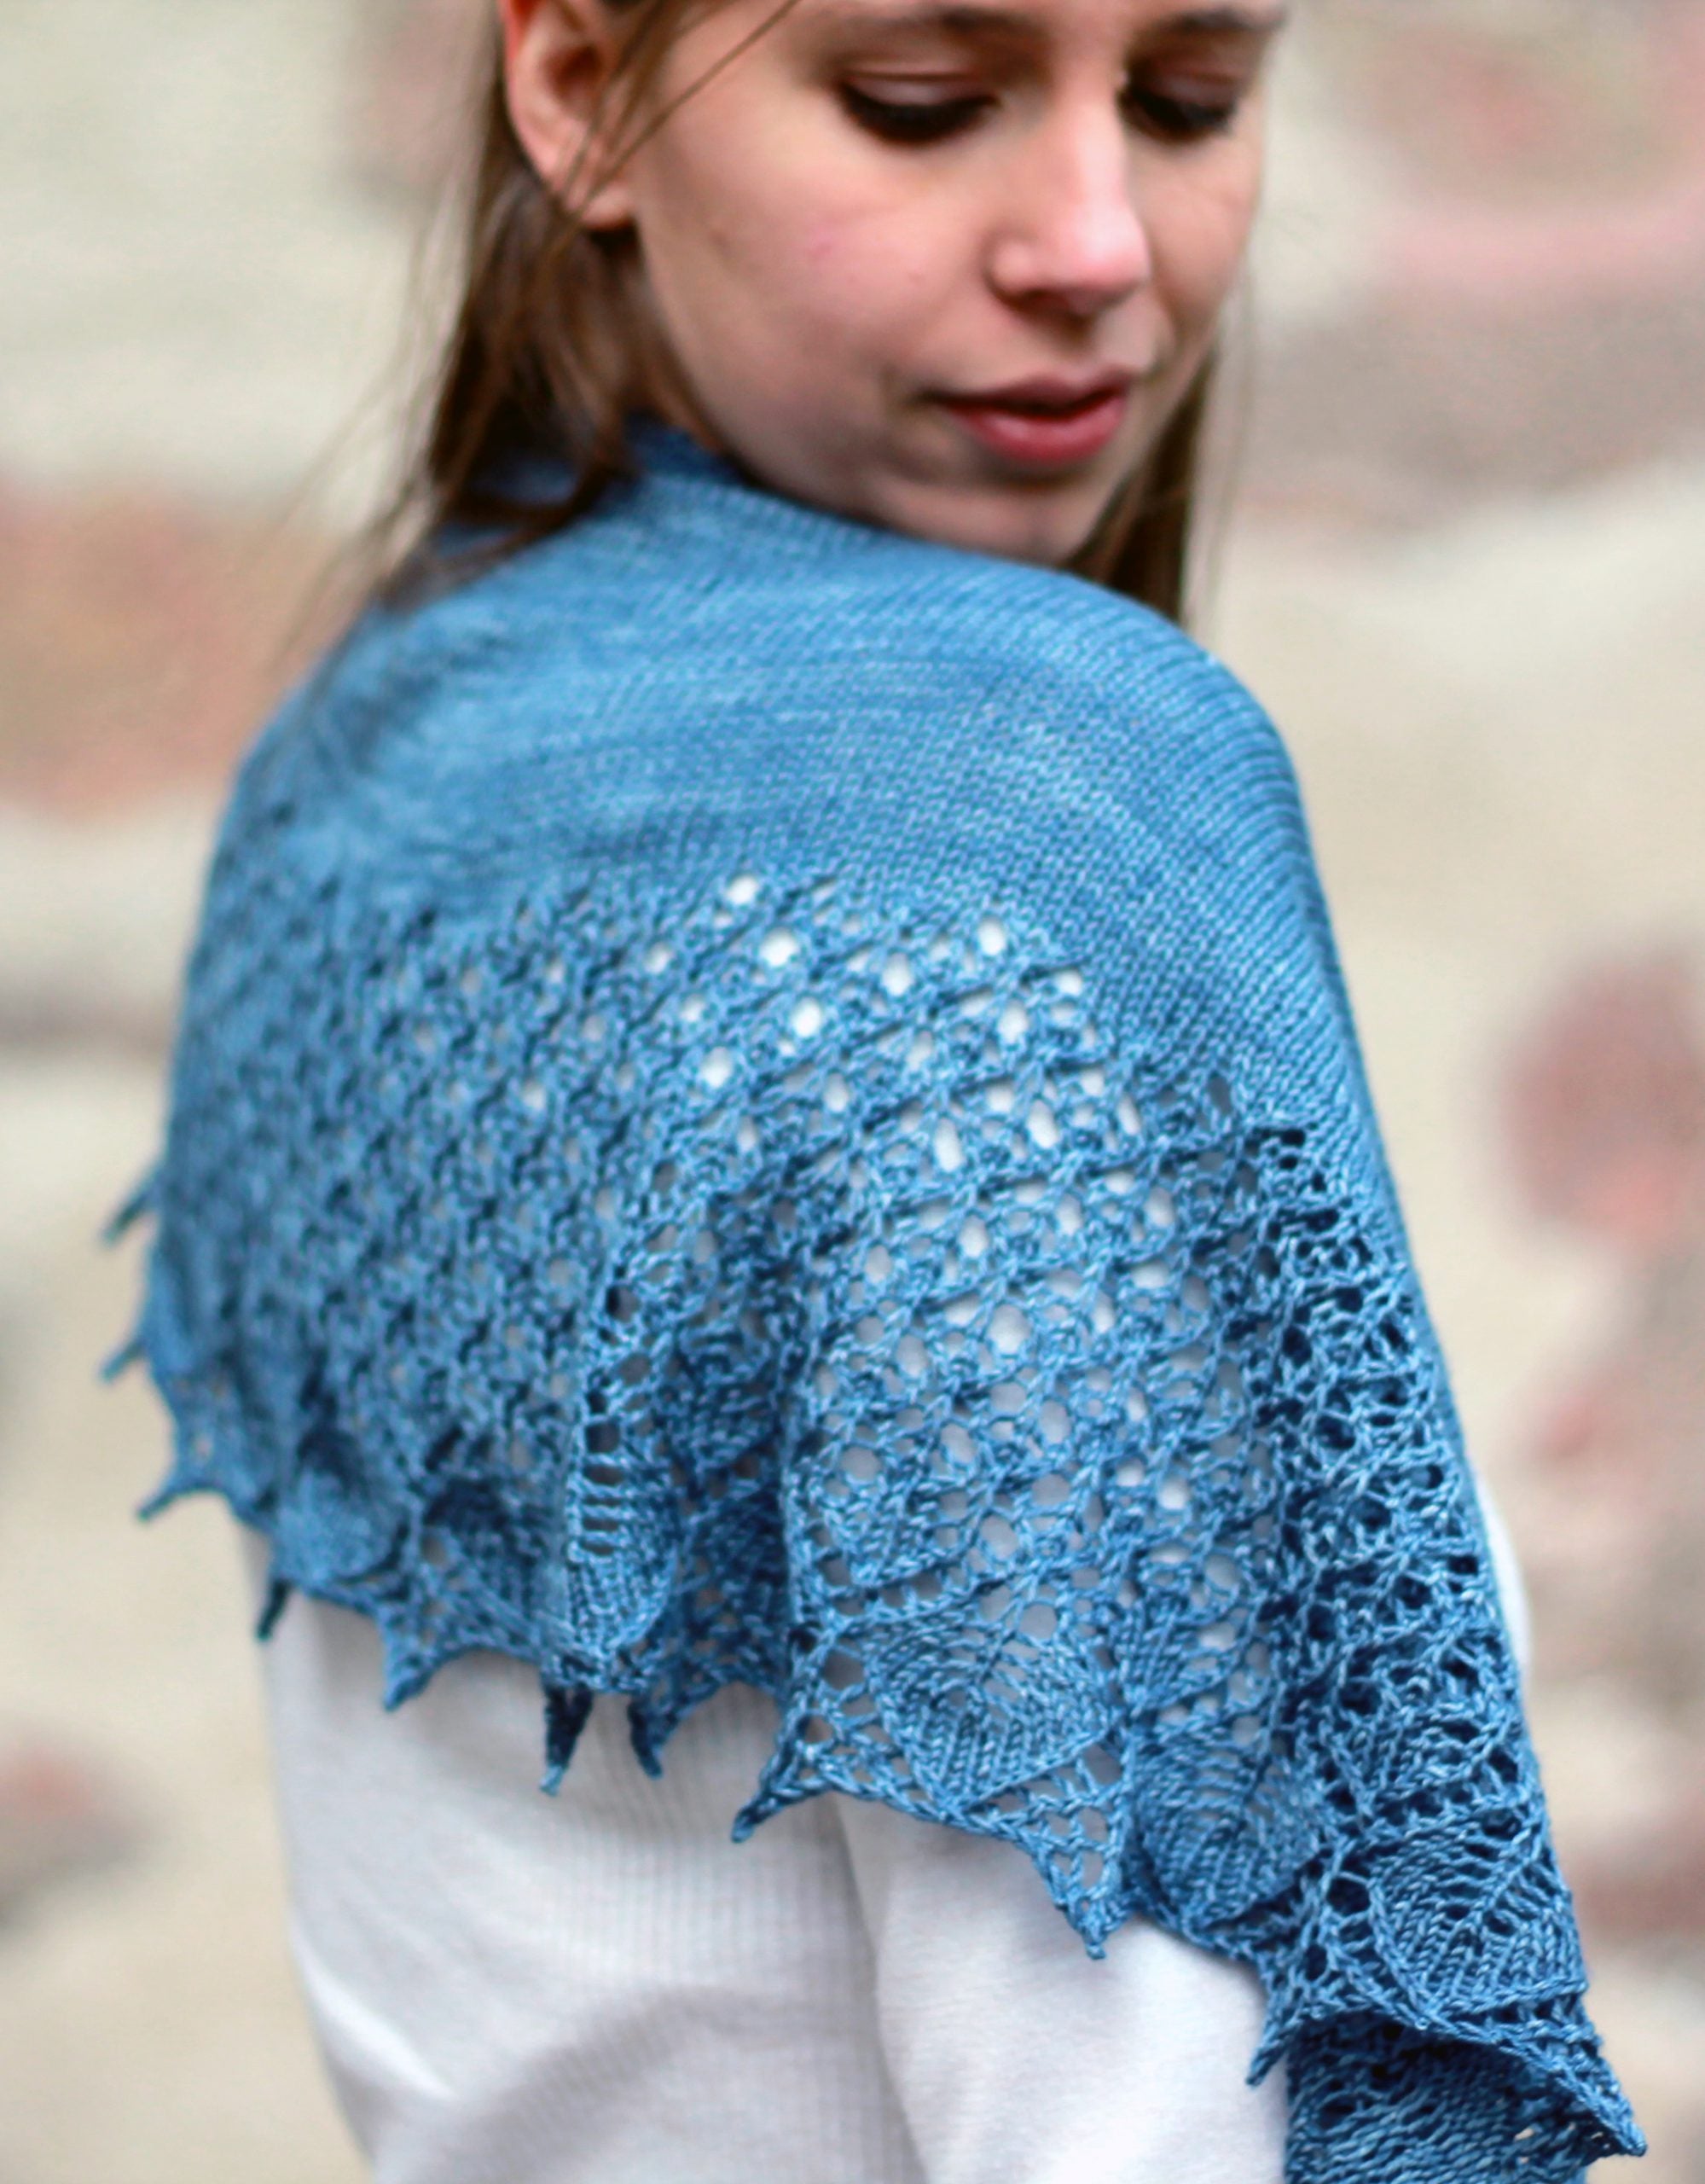 A person stood side on to the camera wearing a white top and a blue shawl draped over their shoulders. The shawl has a solid section closest to the neck and the bottom half is a lace pattern